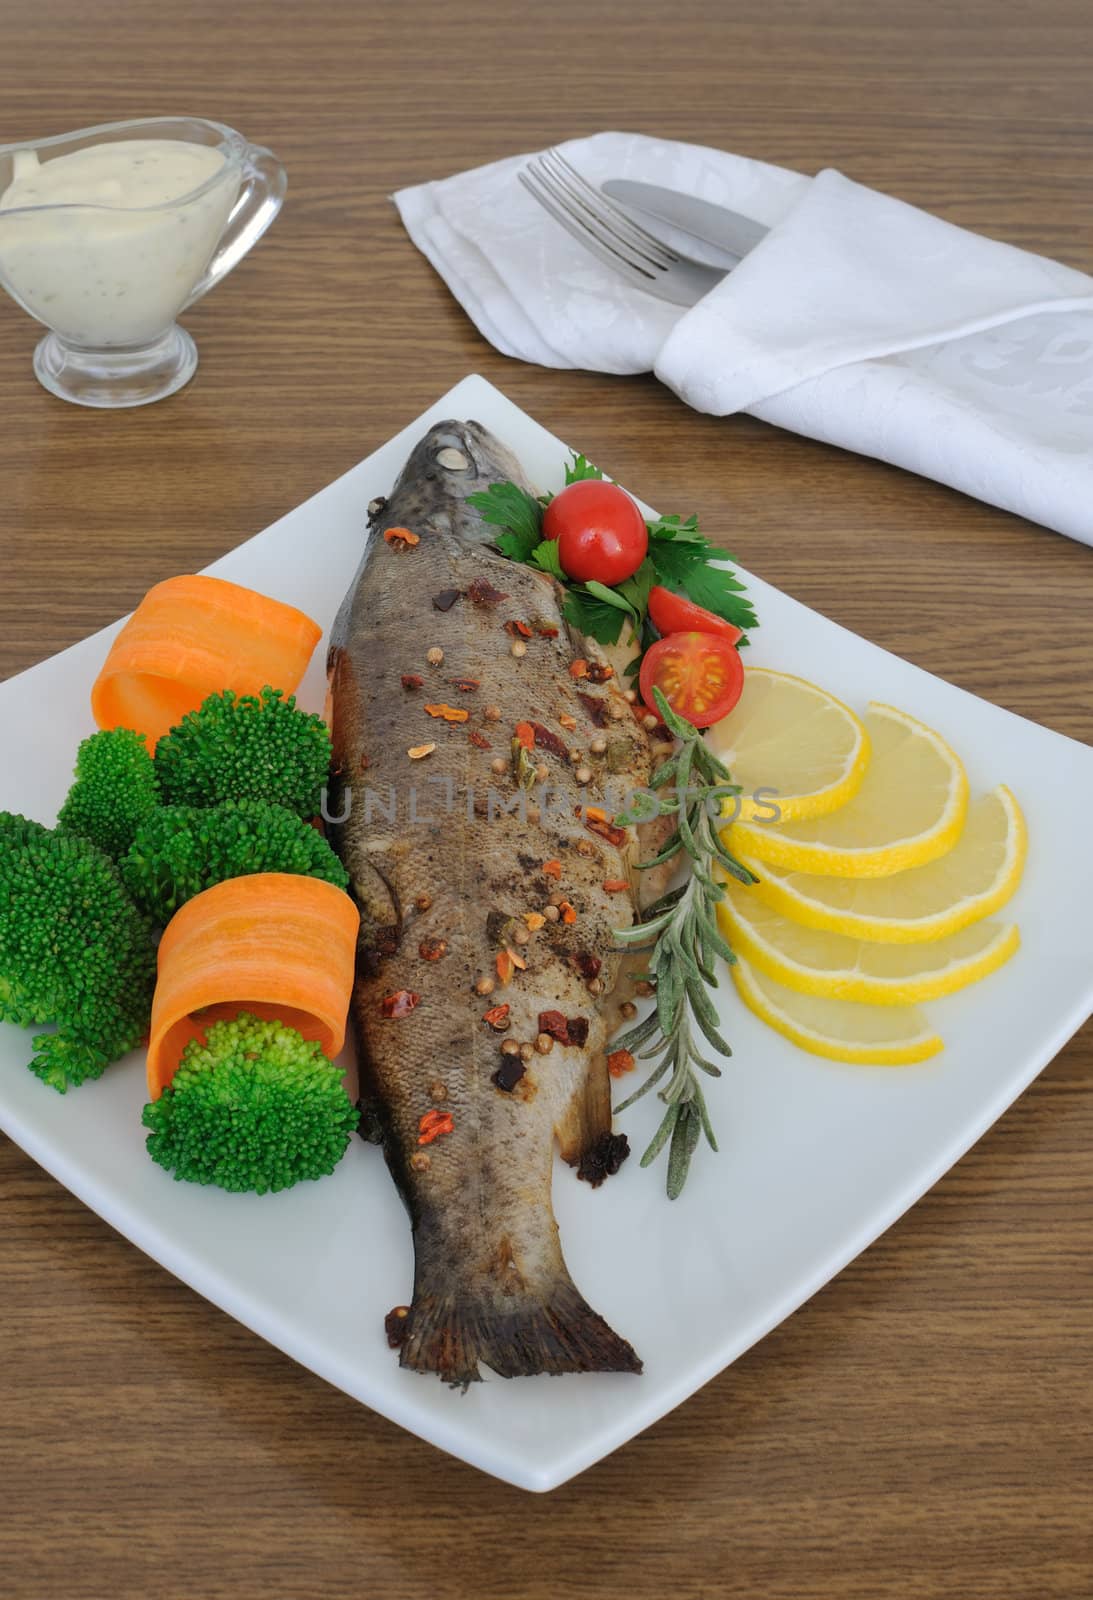 Baked sea bass with broccoli and carrots by Apolonia